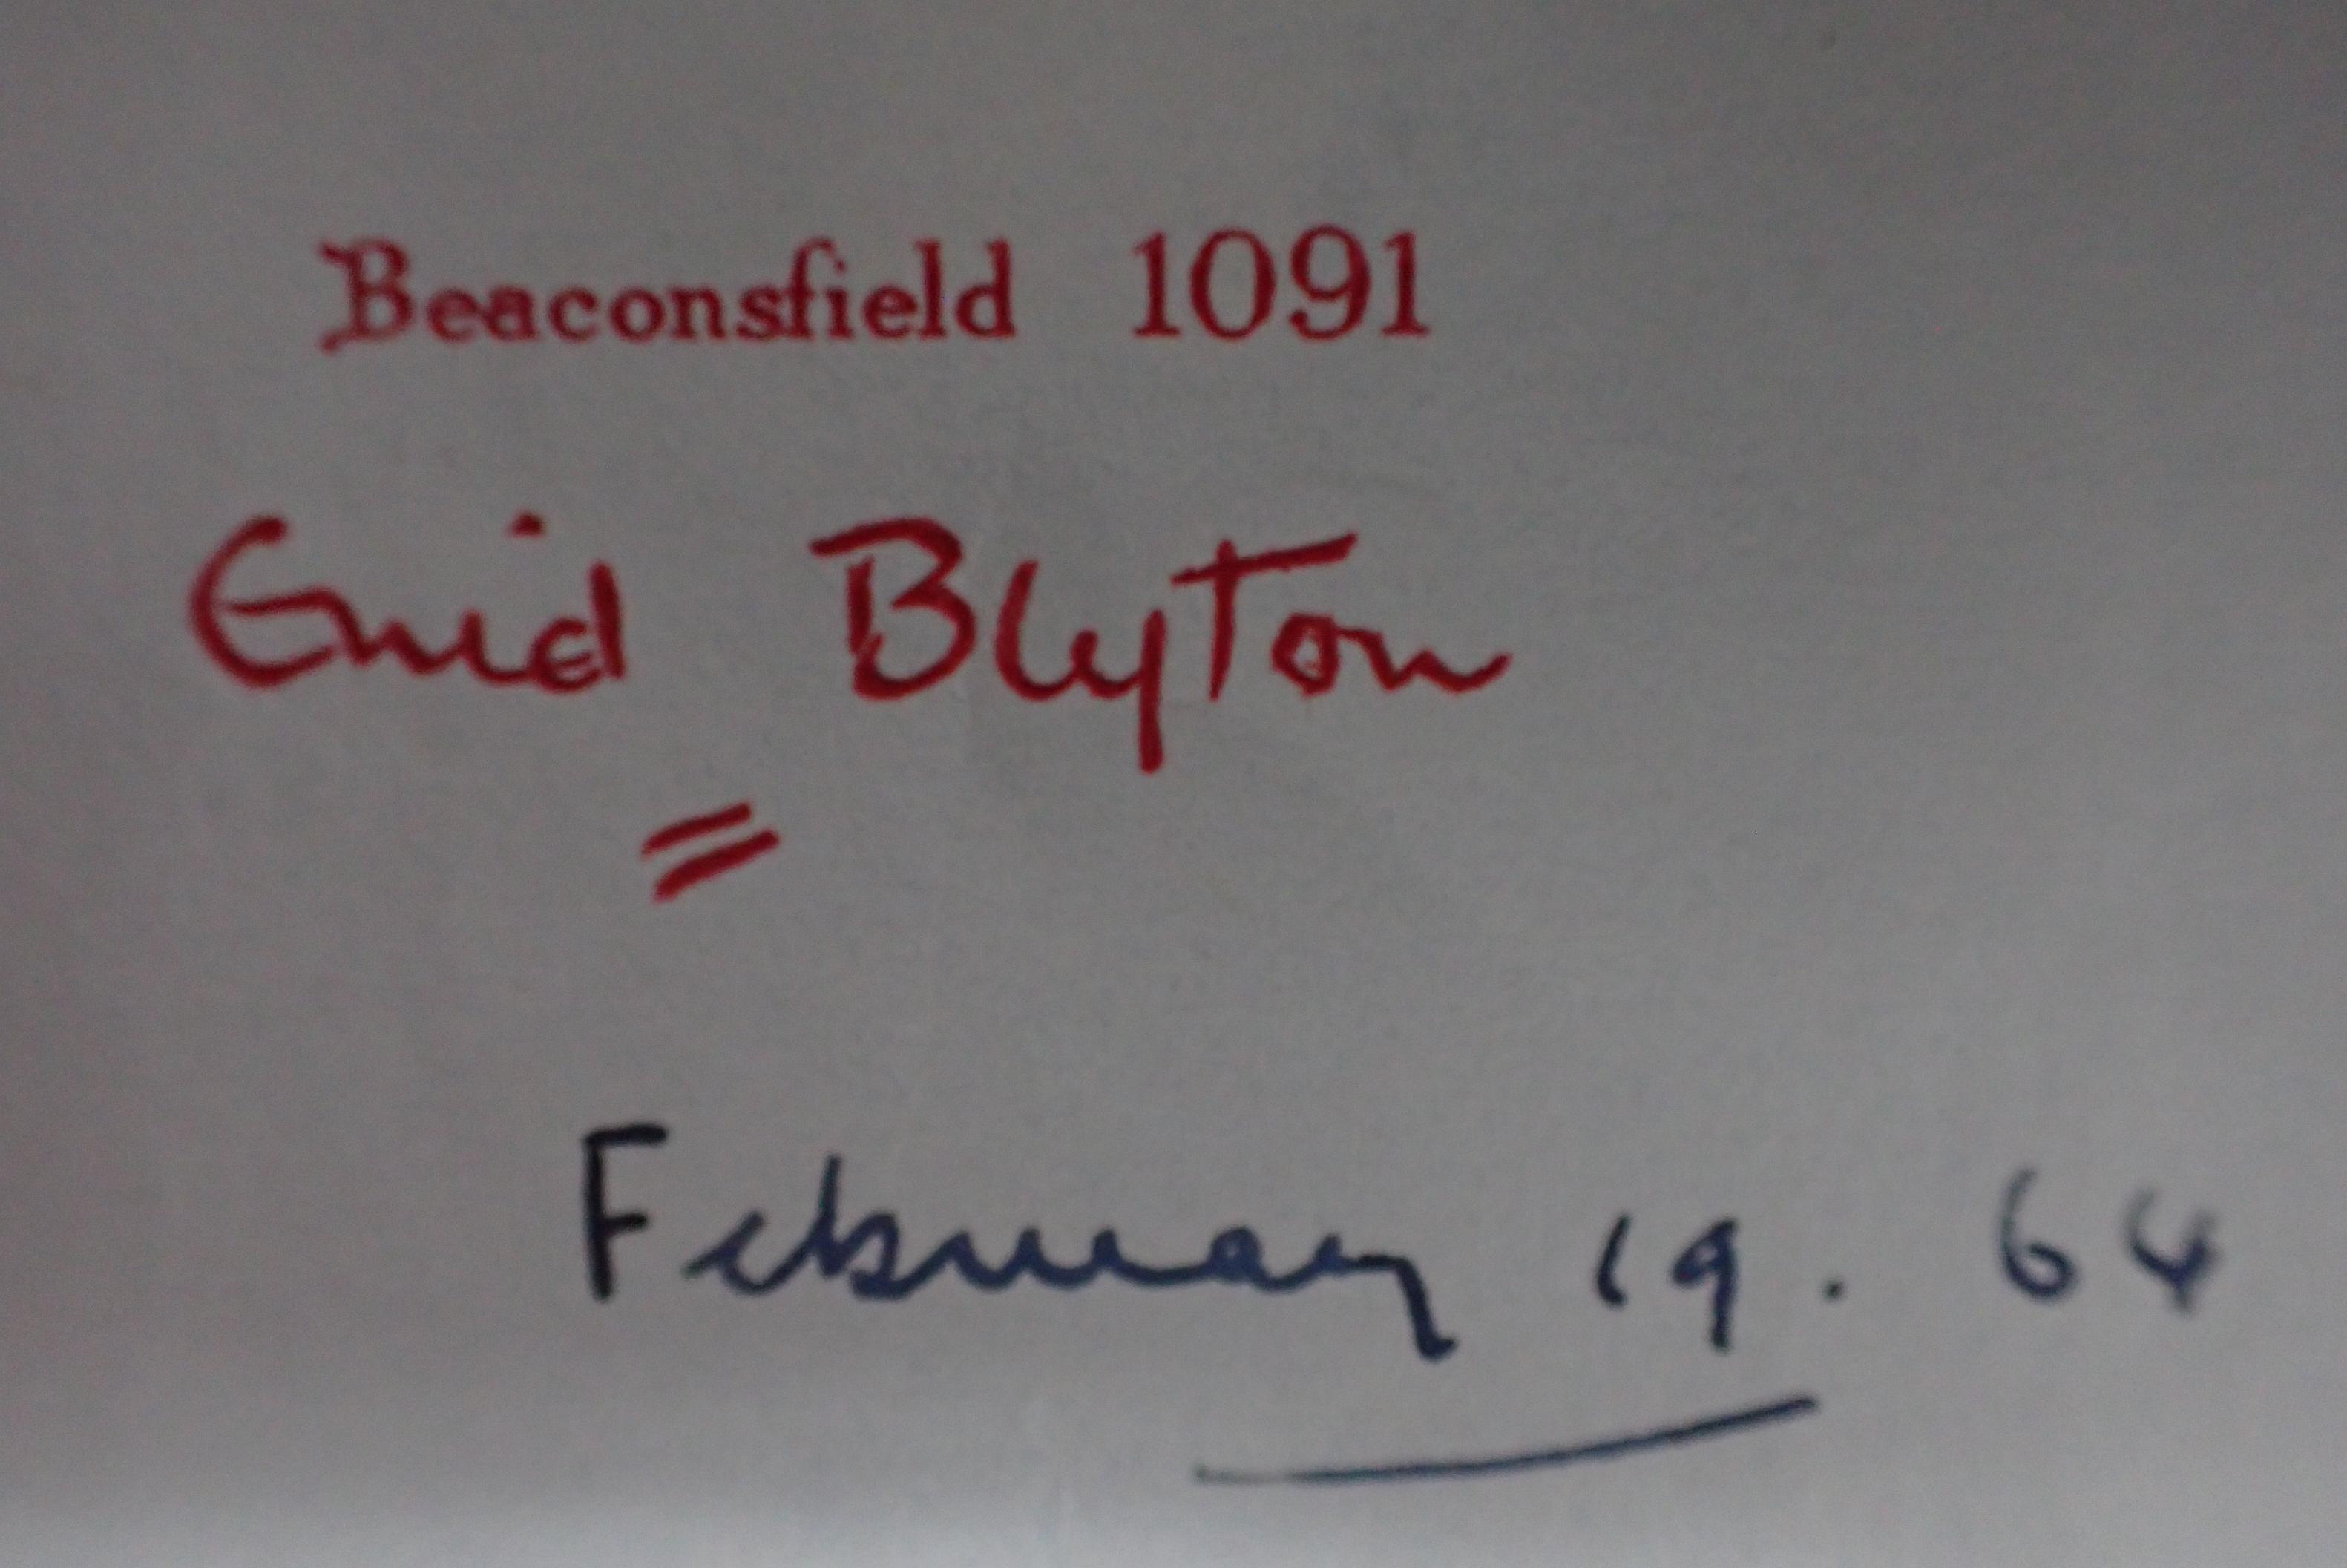 ENID BLYTON: TWO AUTOGRAPH SIGNED LETTERS - Image 6 of 6